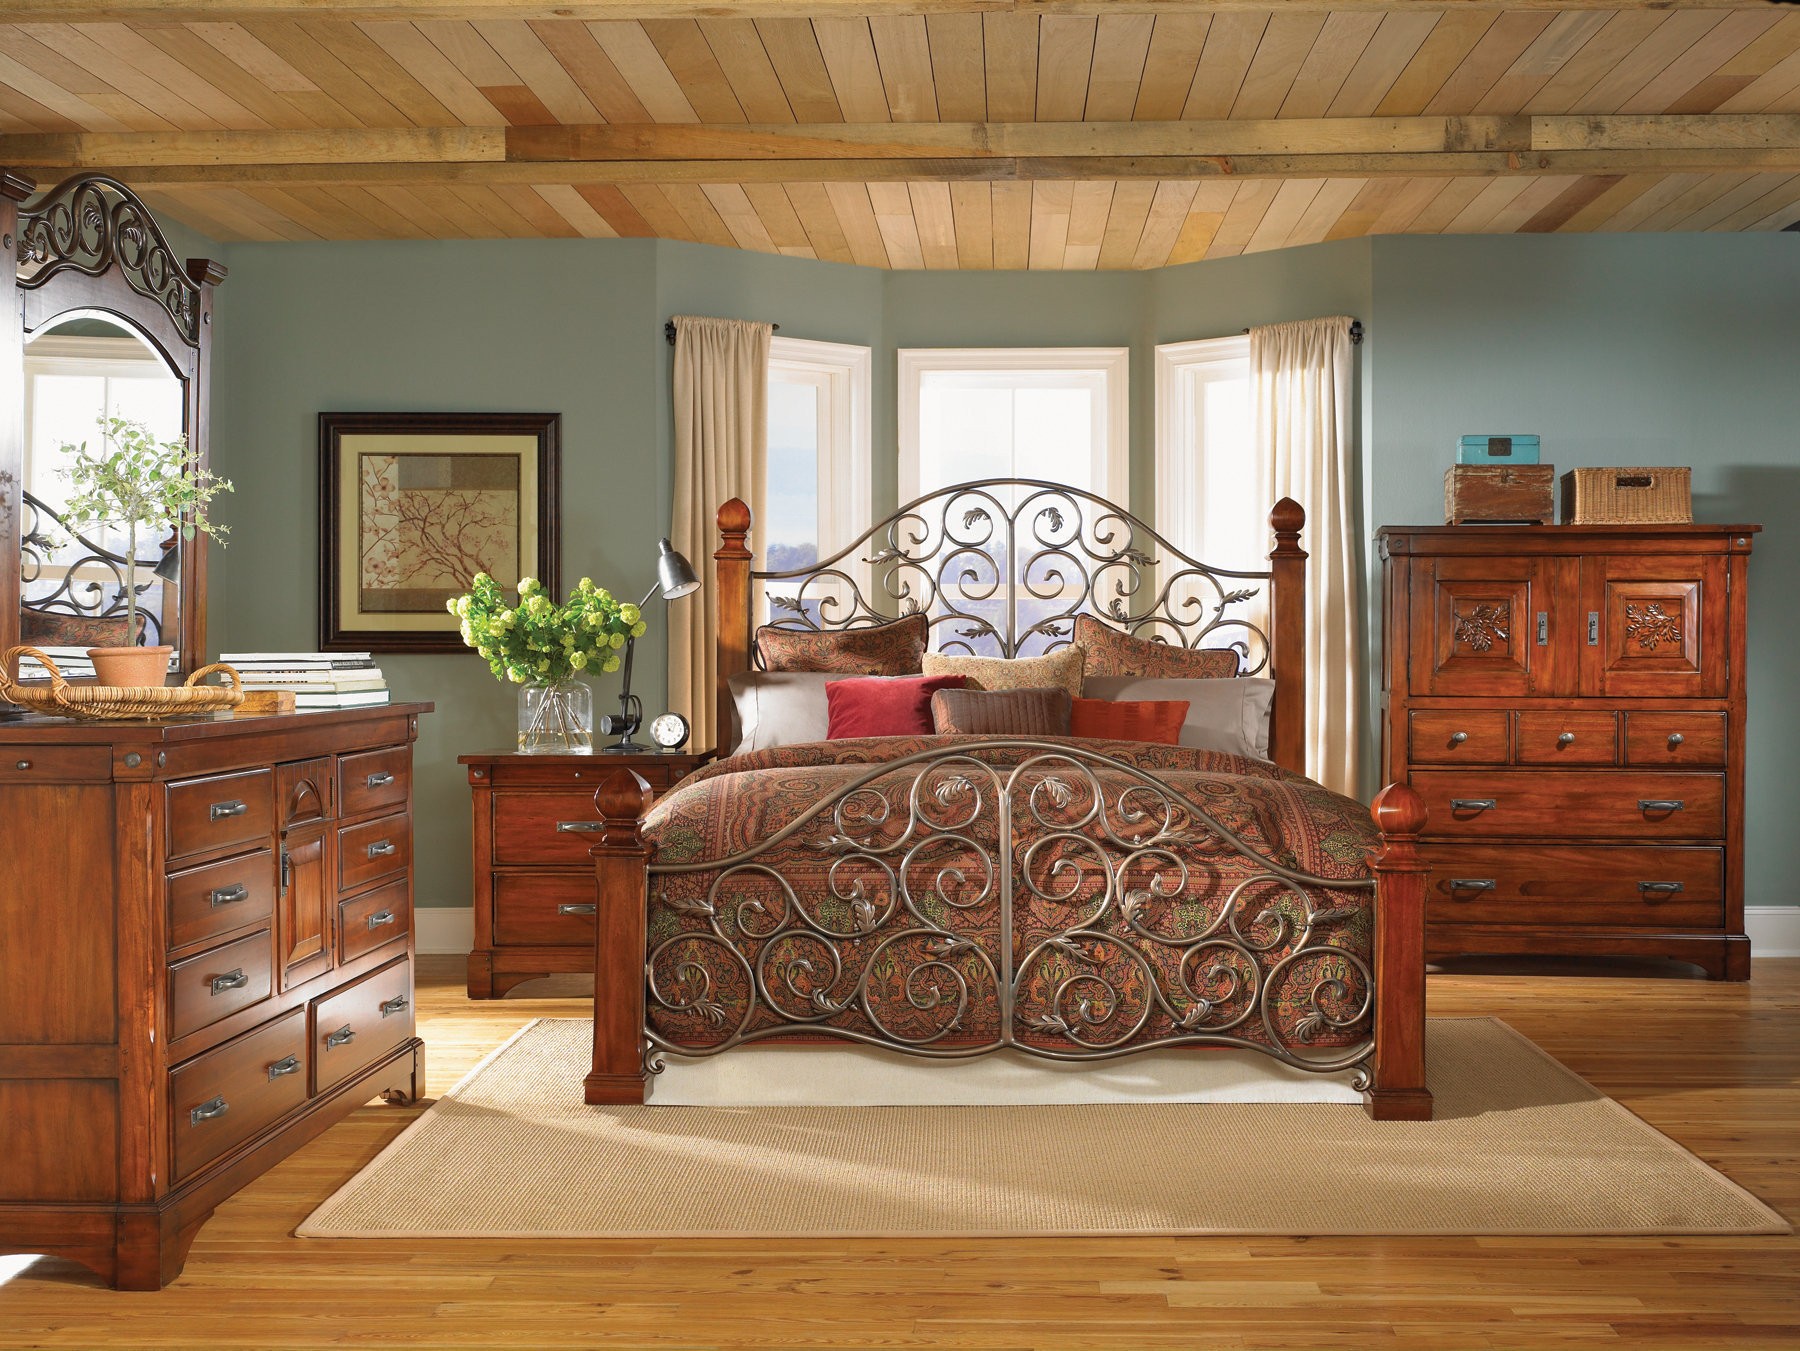 The maryland heights iron and wood bed set